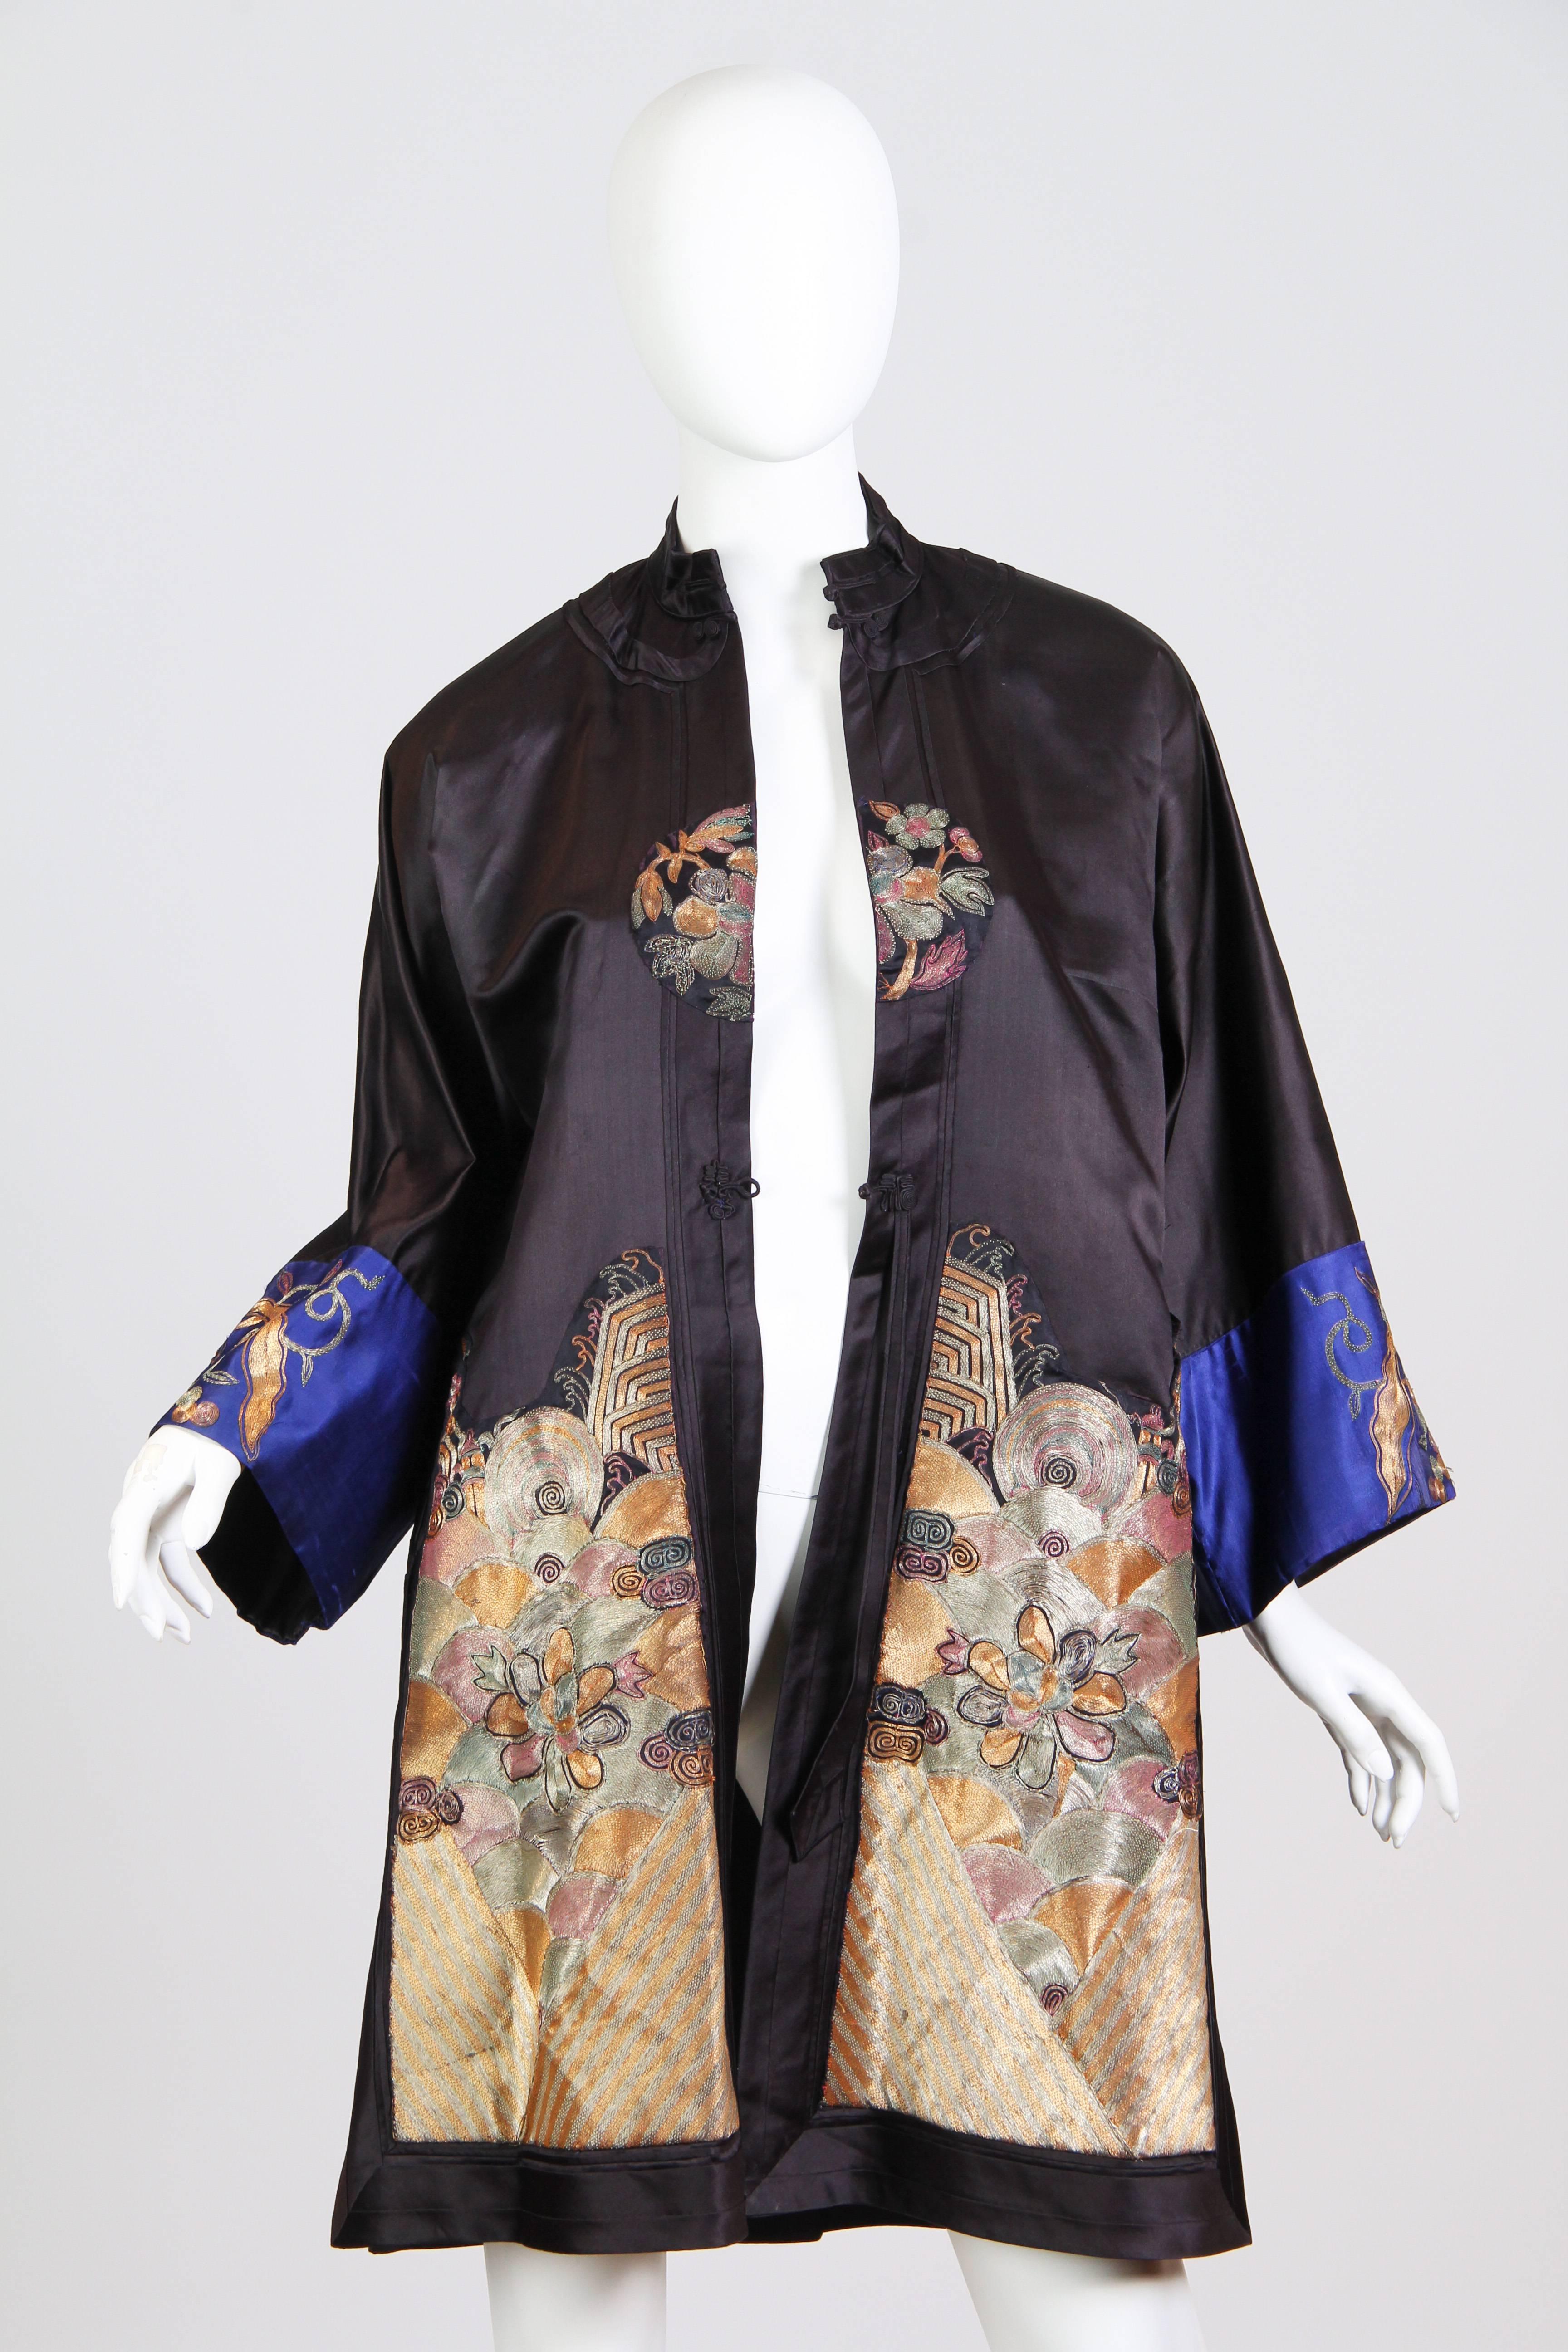 This is a beautiful hand-made jacket. Most likely made in China, this style of jacket was both a traditional garment and a popular import to Europe, where Asian clothing was all the rage for lounge- and boudoir-wear. The mixed geometric and floral